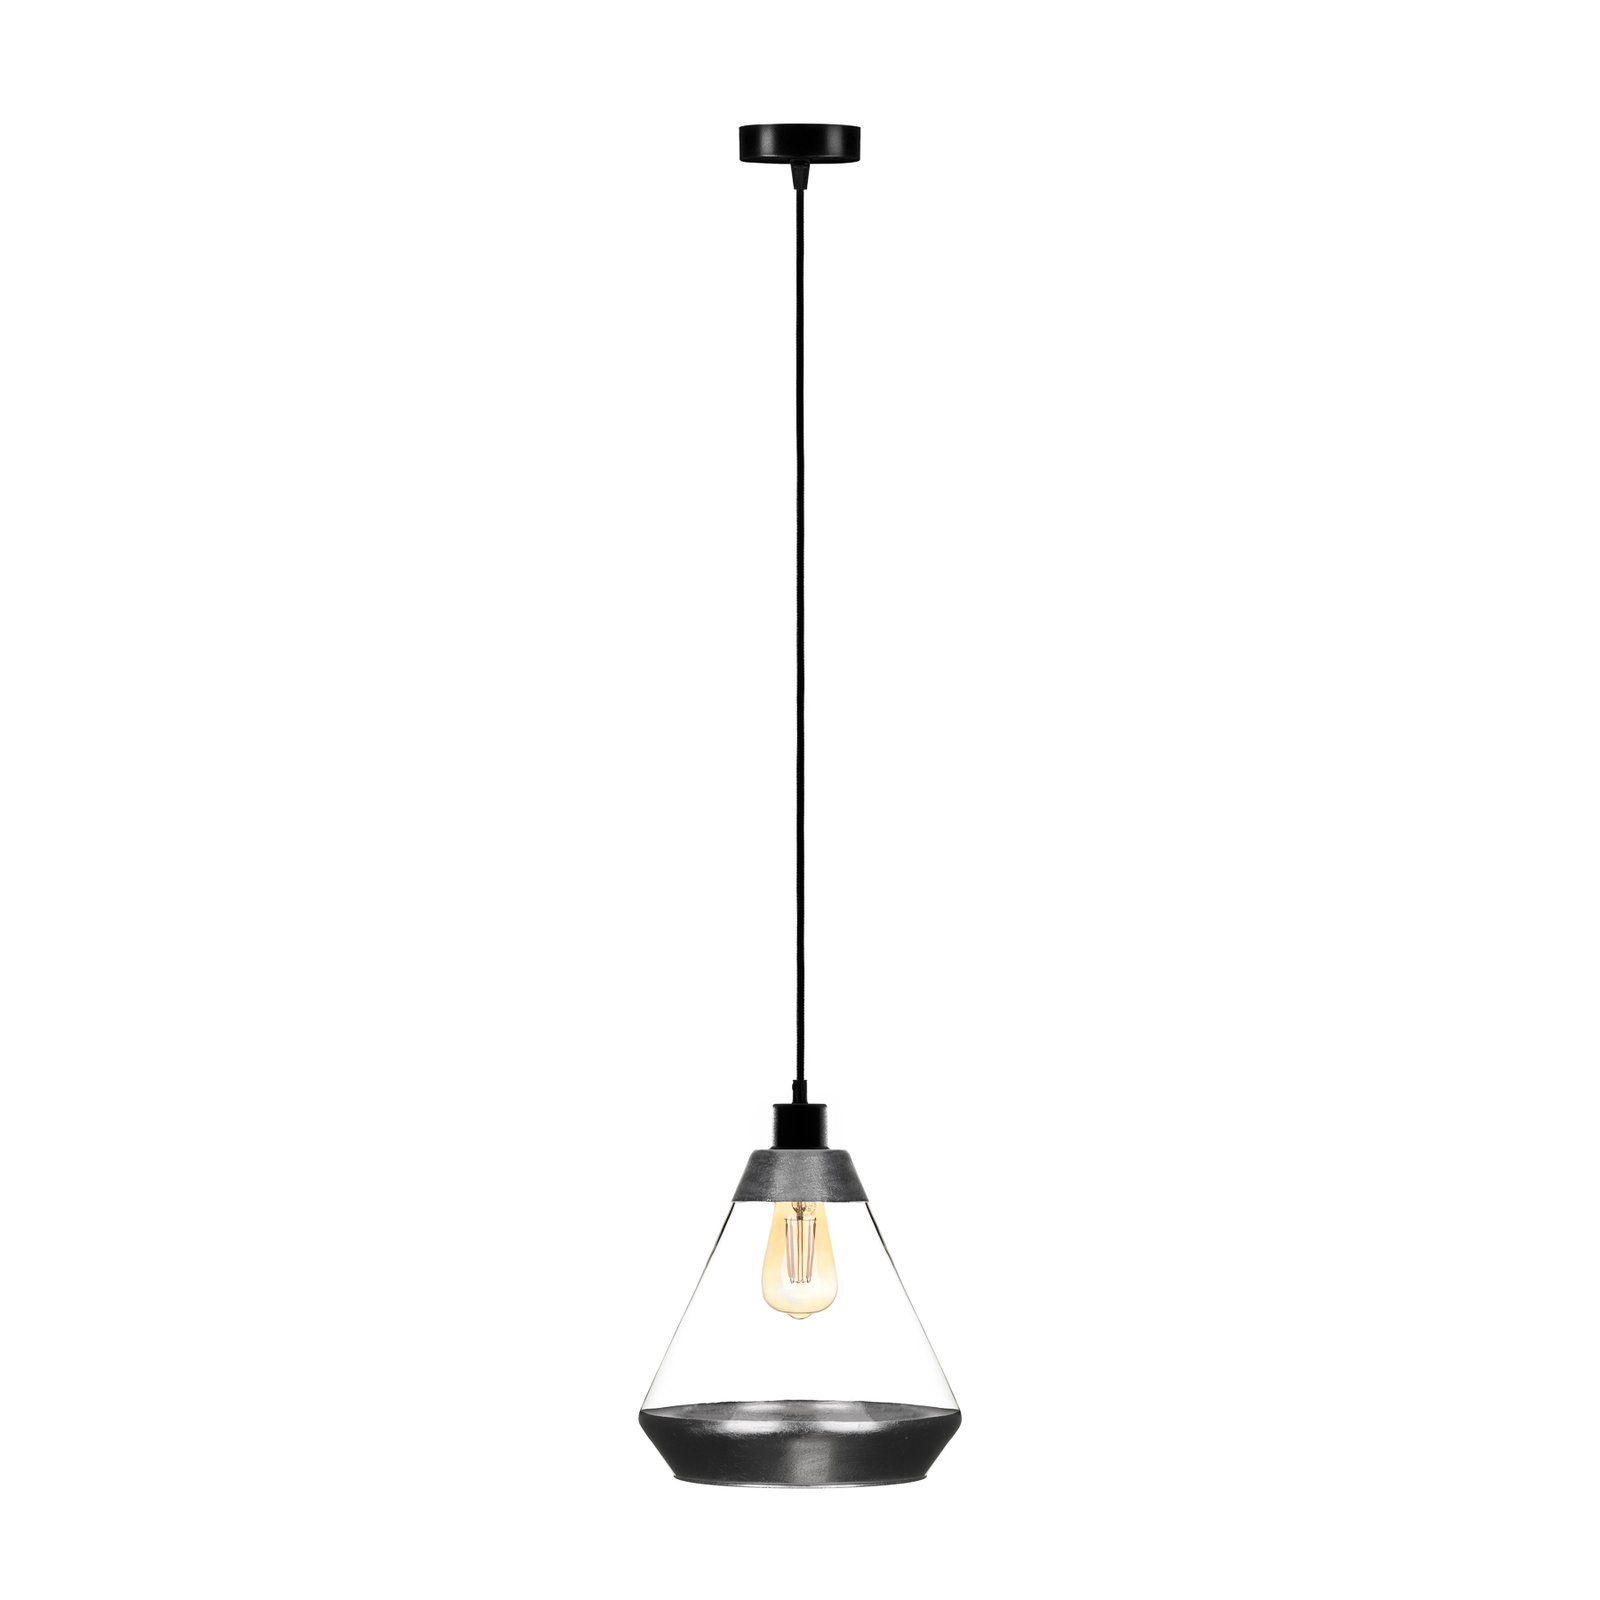 Lonceng pendant light made of glass, silver décor